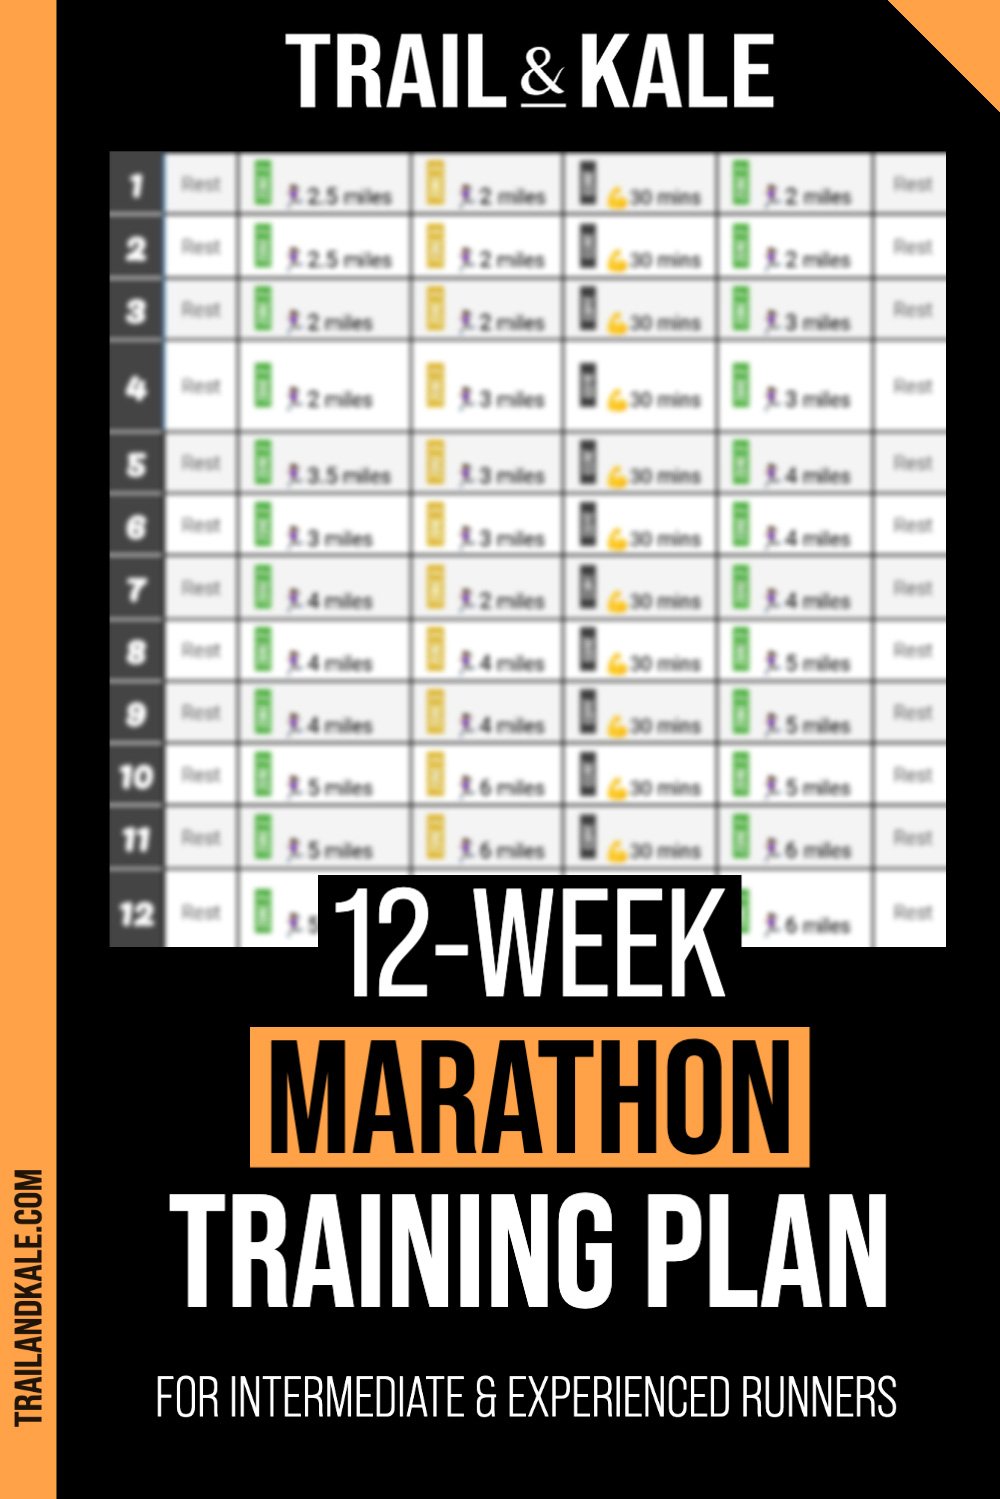 12 Week Marathon Training Plan For Experienced and Intermediate runners by Trail Kale